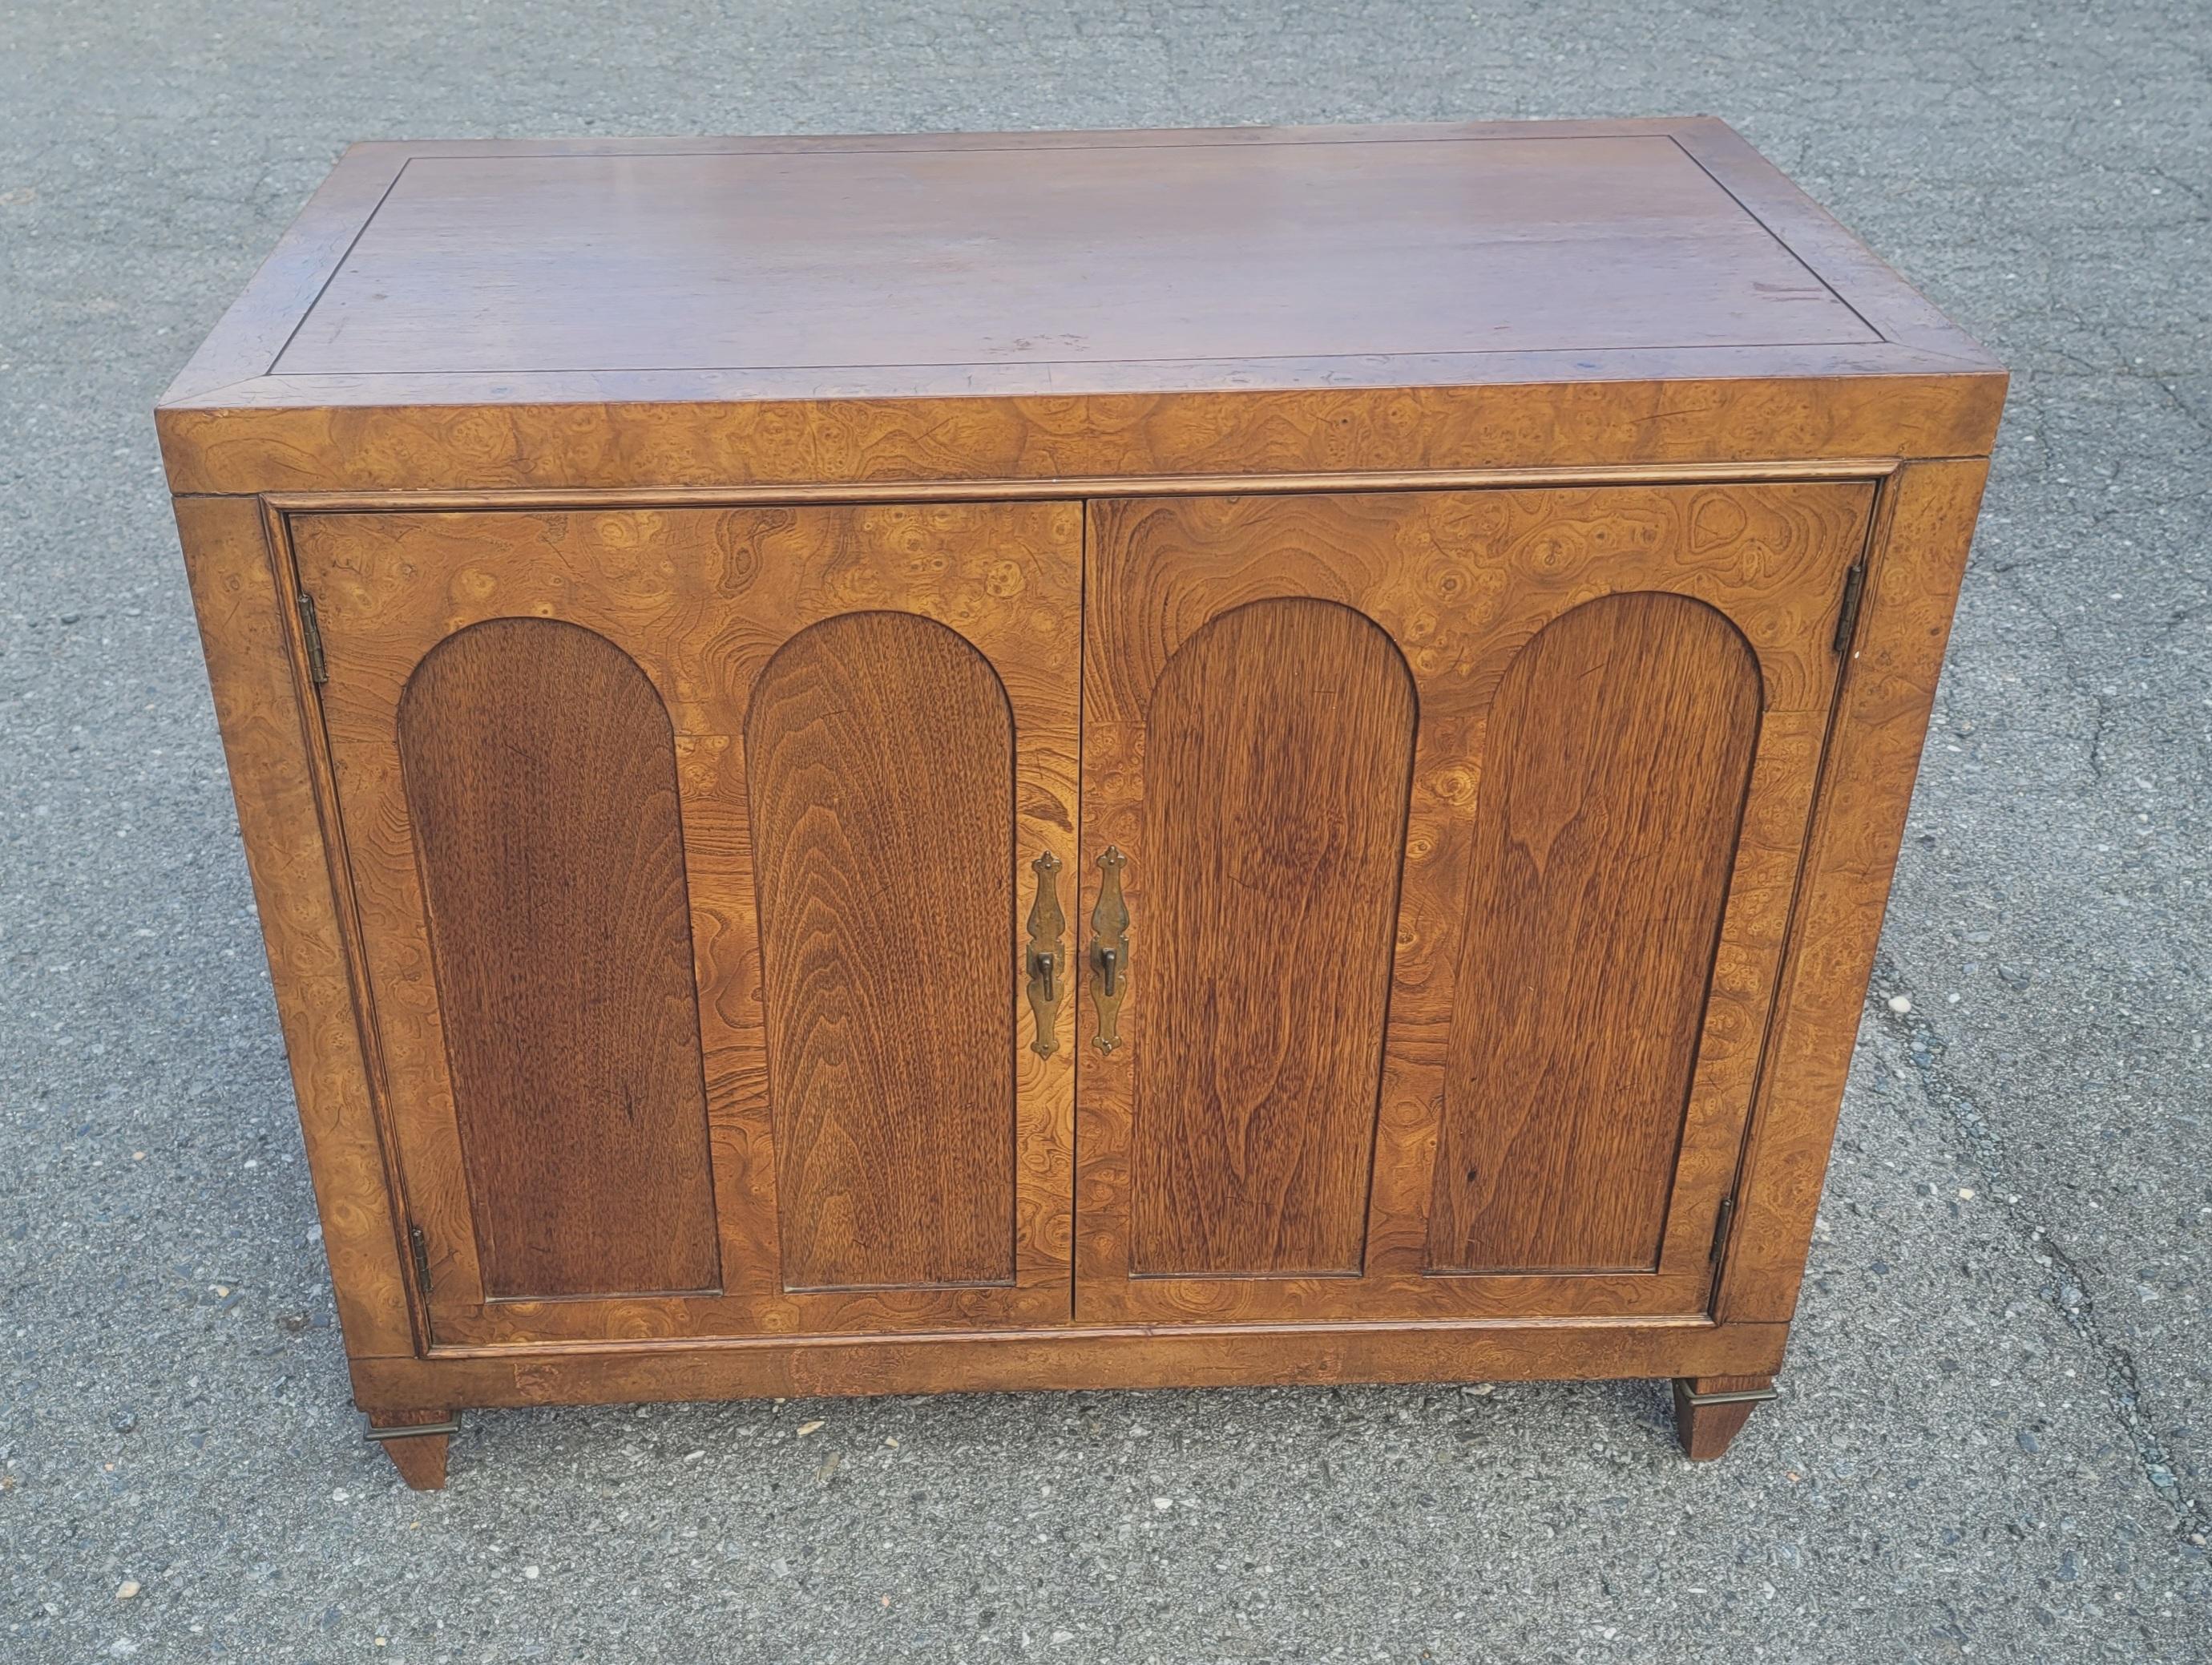 Pair of Mastercraft Burled and Walnut Colonnade Cabinets Credenza Buffet Server In Good Condition For Sale In Germantown, MD